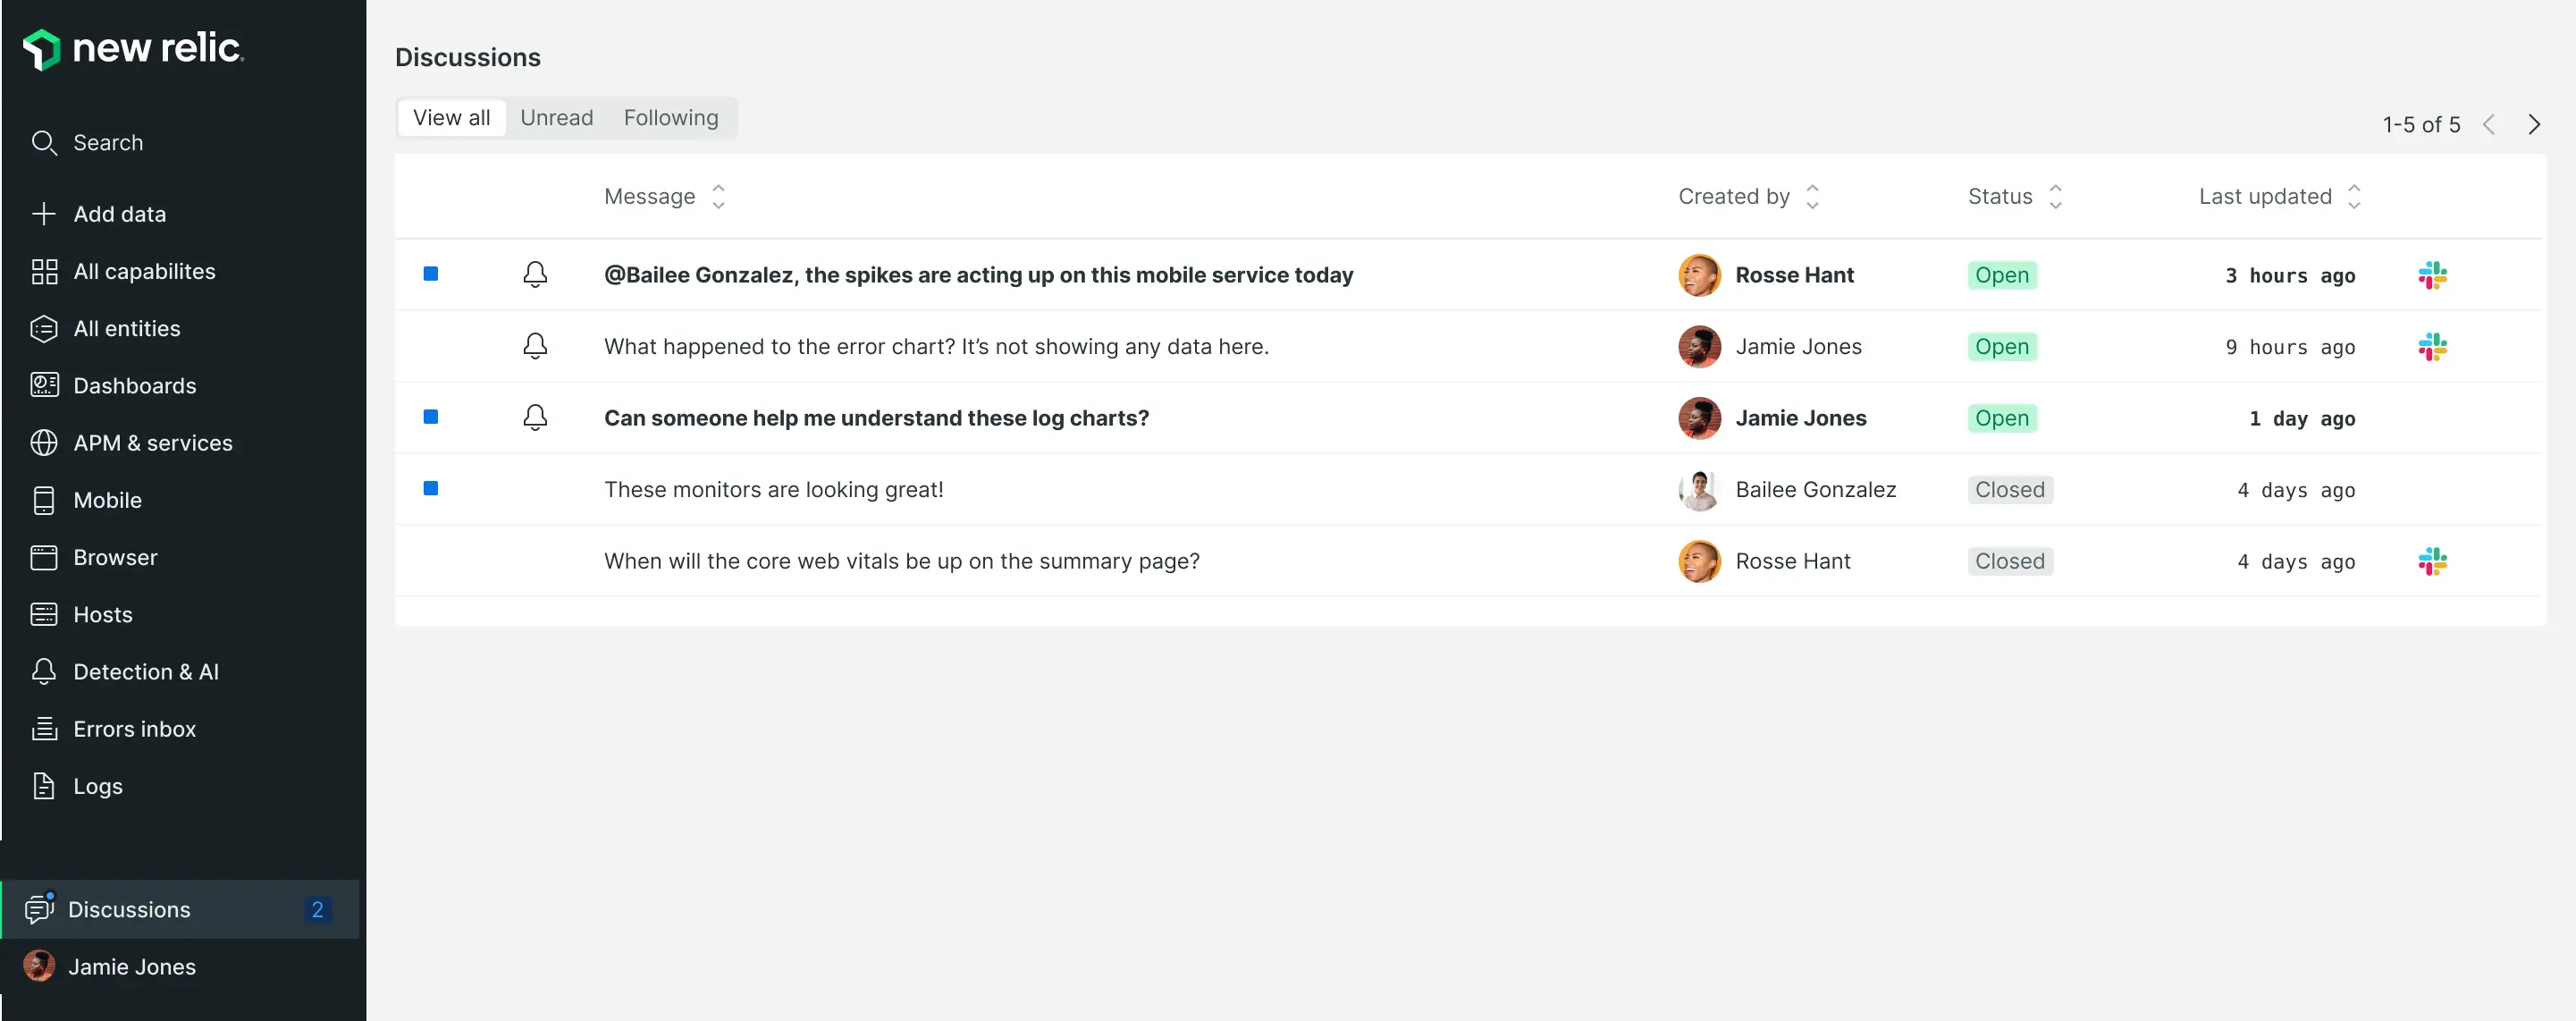 A screenshot of the UI that depicts the discussions board.